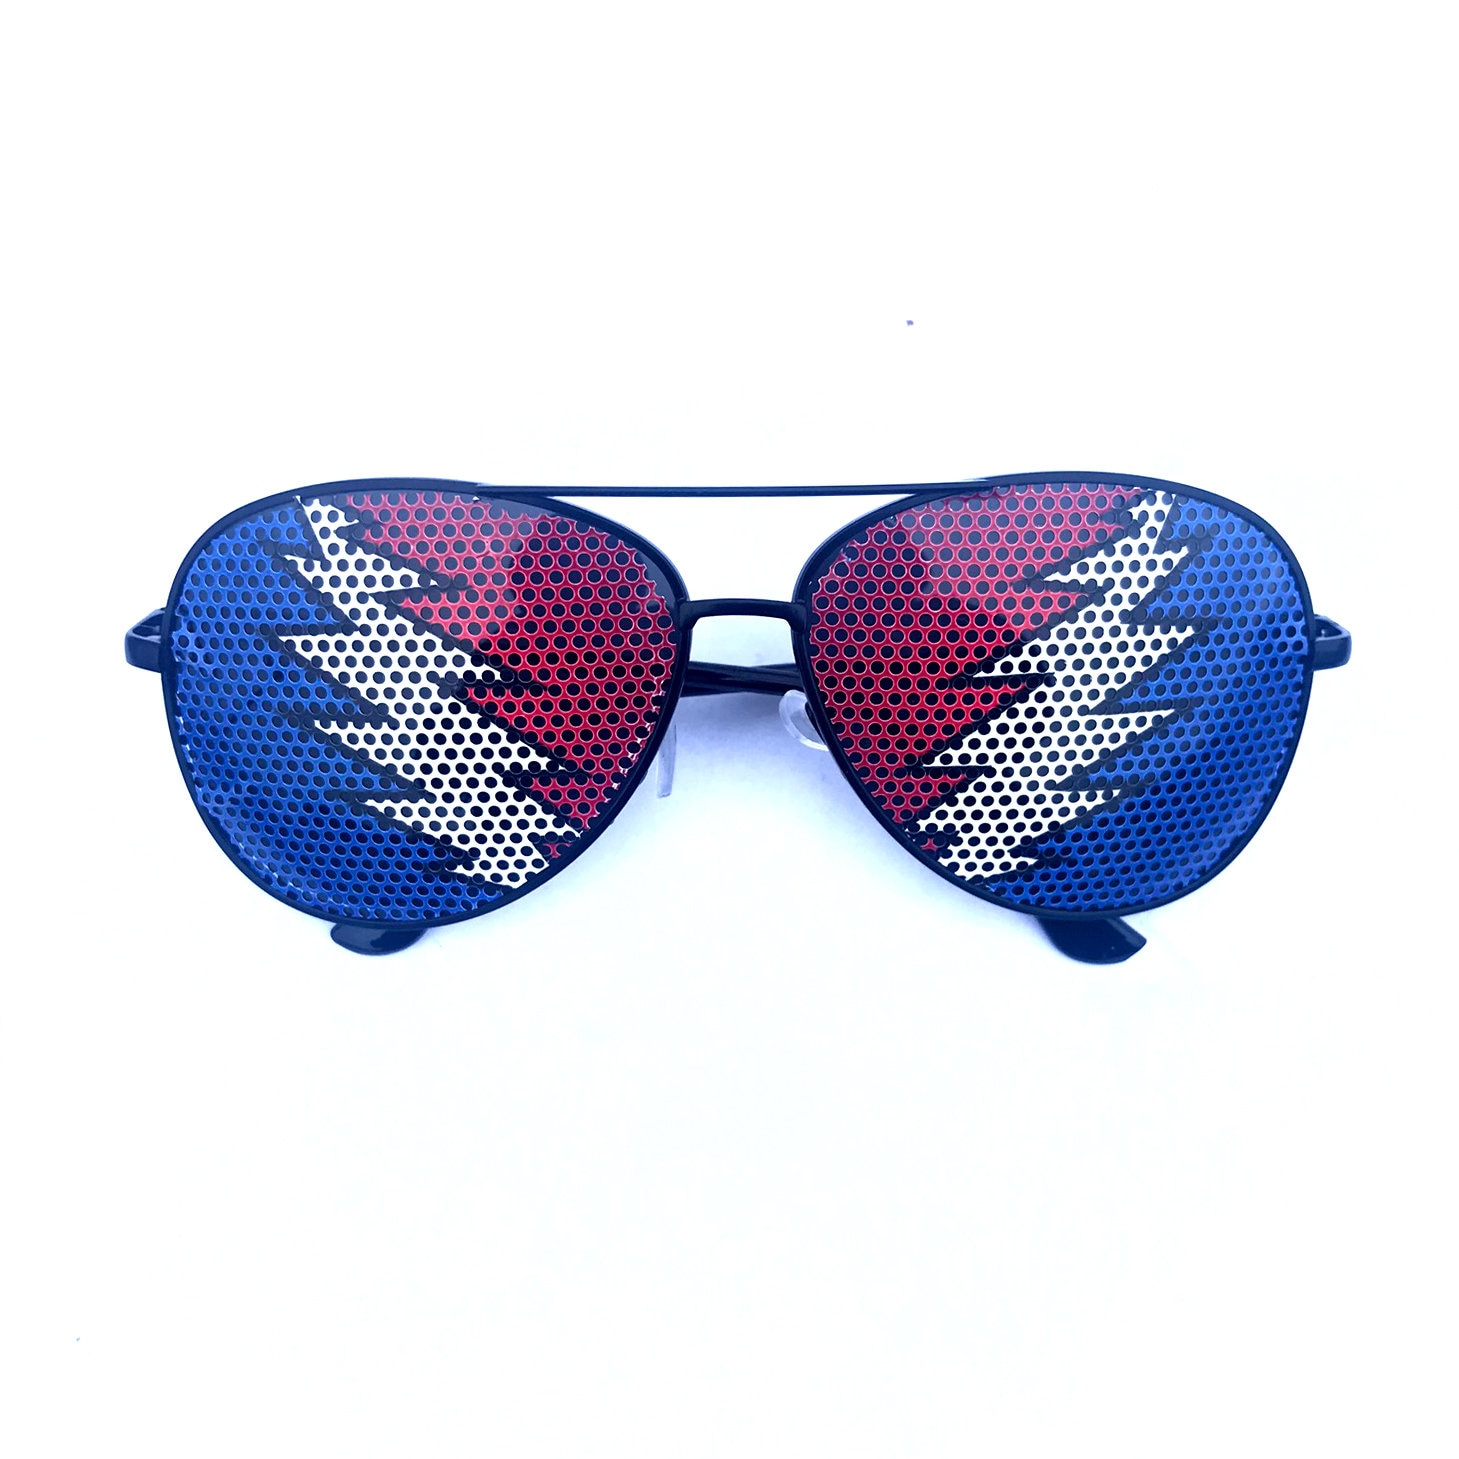 Graphic Sam other - Available Uncle Aviator Bolt Sunglasses, Etsy Styles